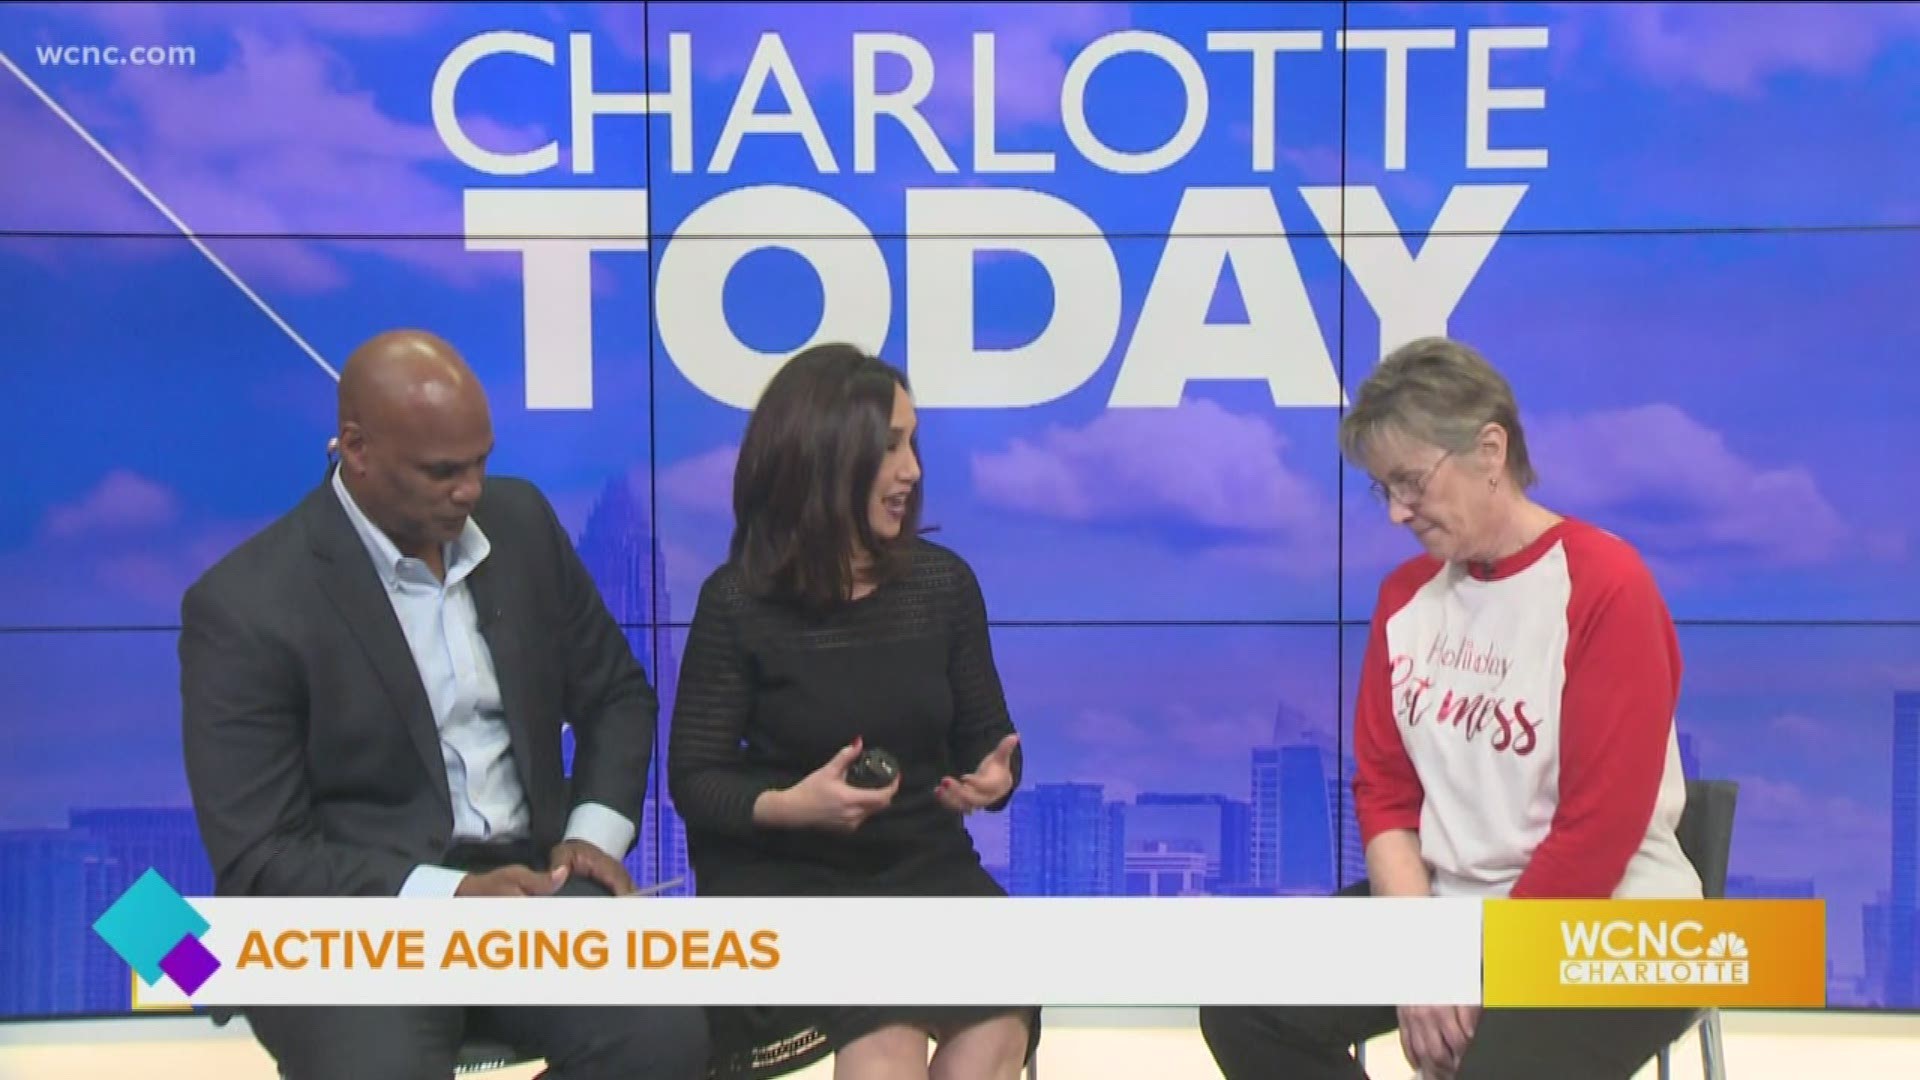 Senior fitness instructor Kathy Joy shares ideas on how to stay active and healthy.